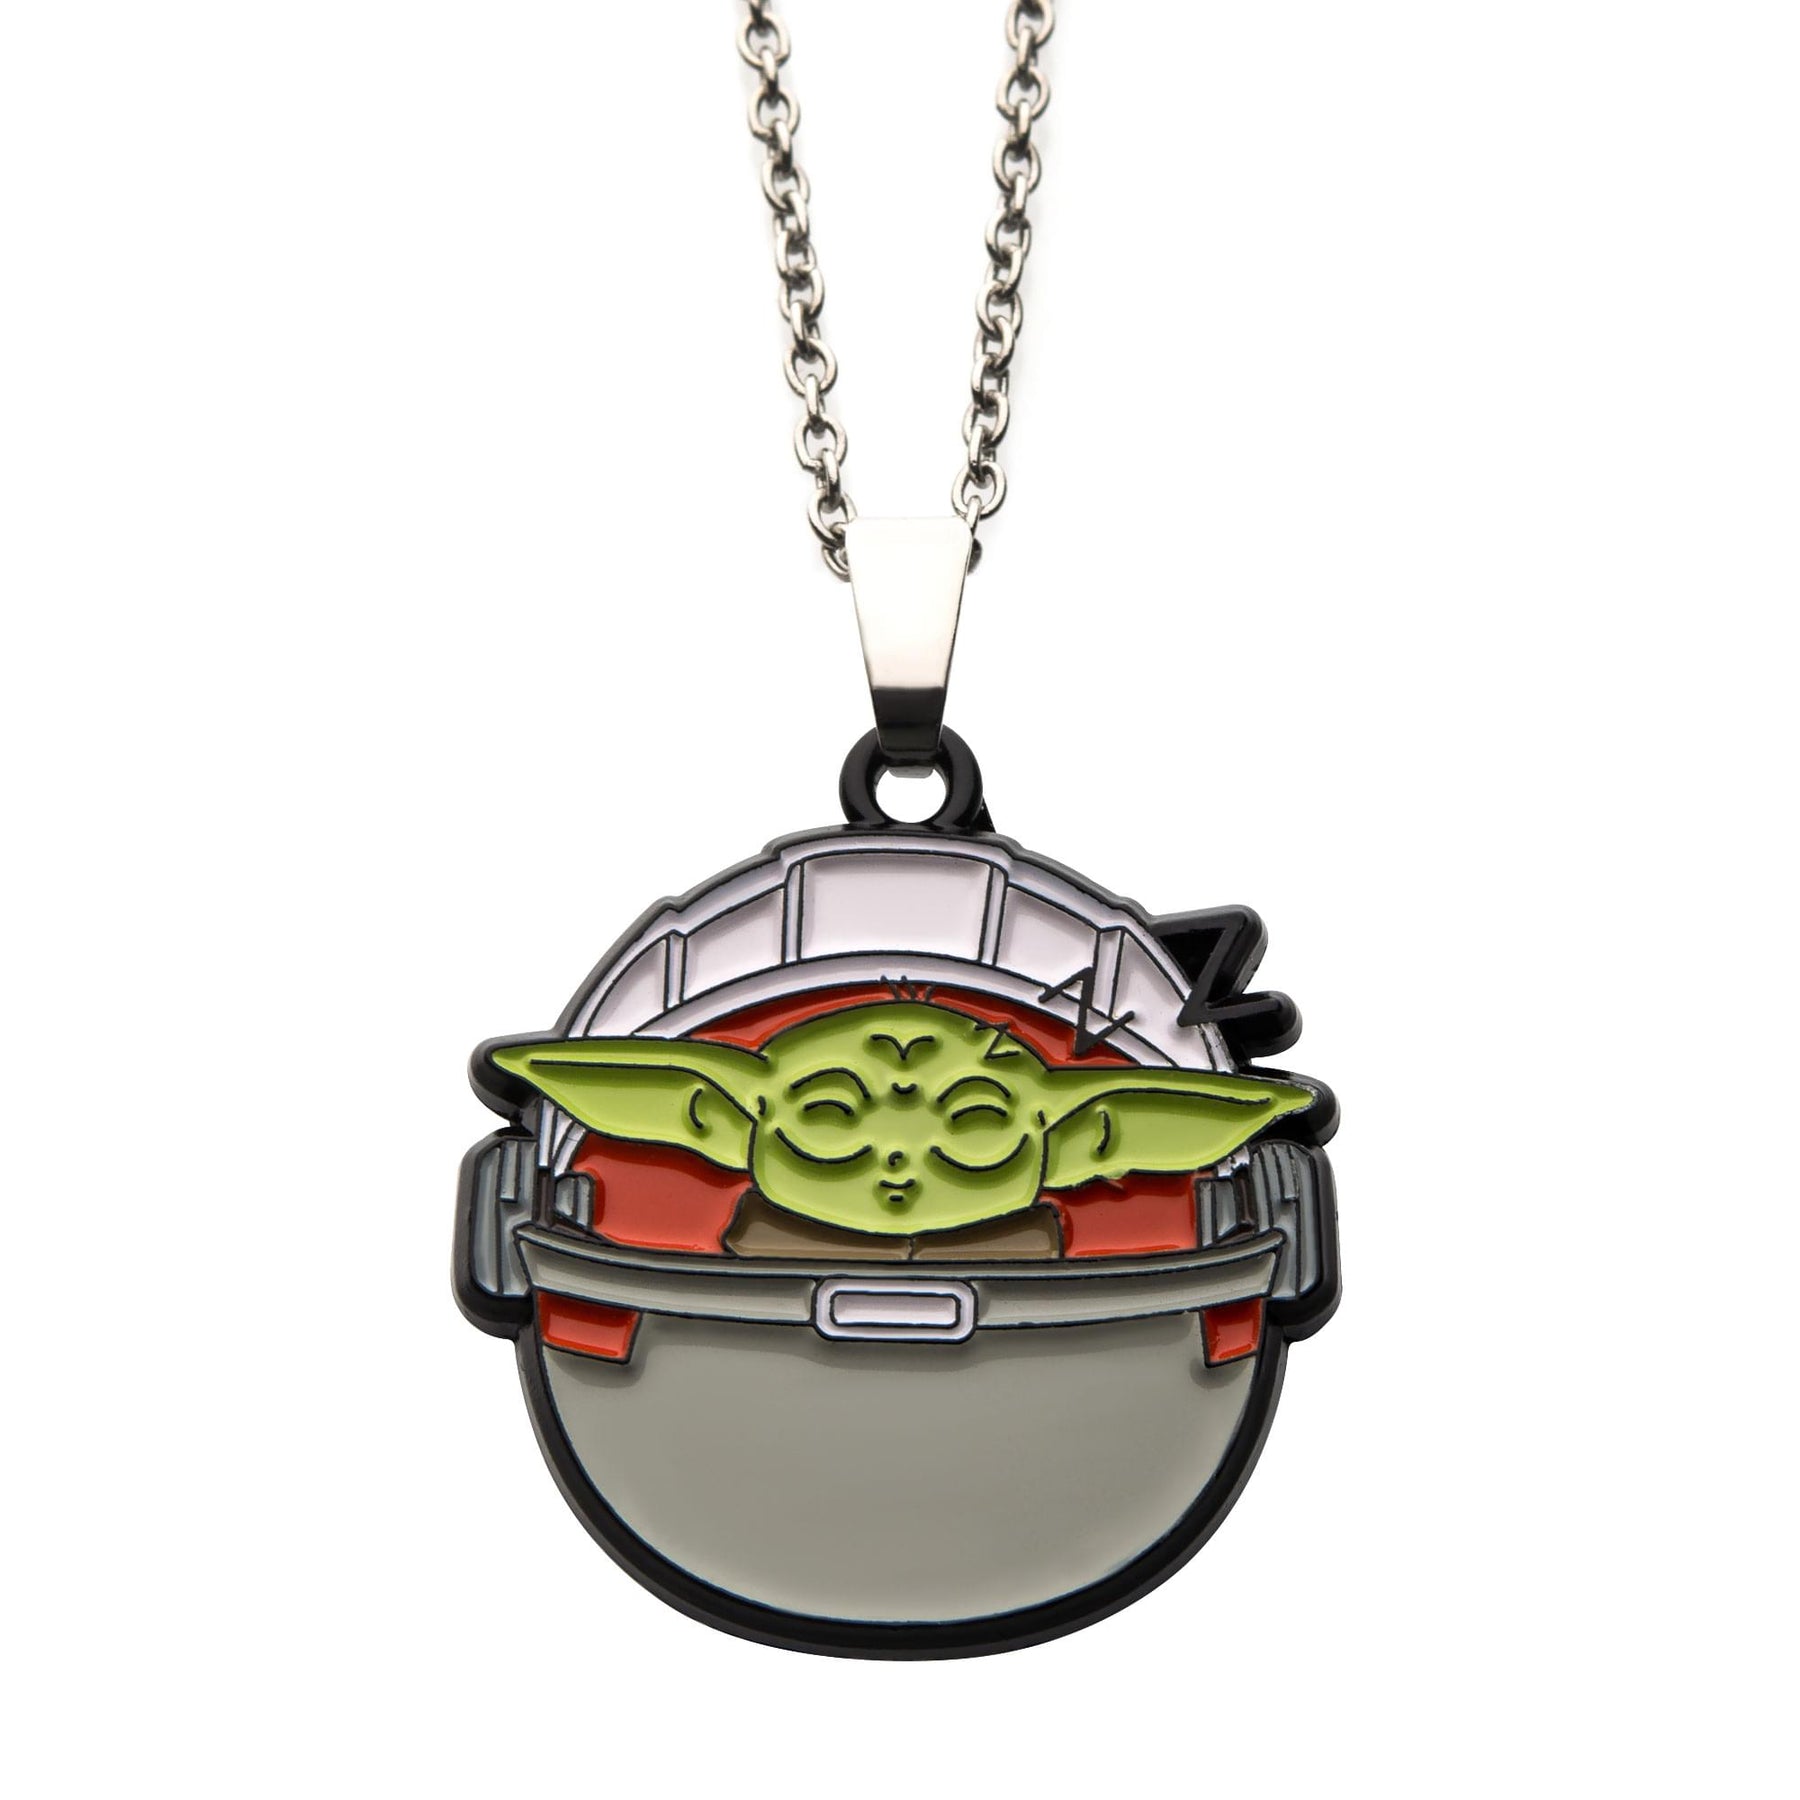 Star Wars The Mandalorian The Child Sleeping In Carriage Pendant Necklace